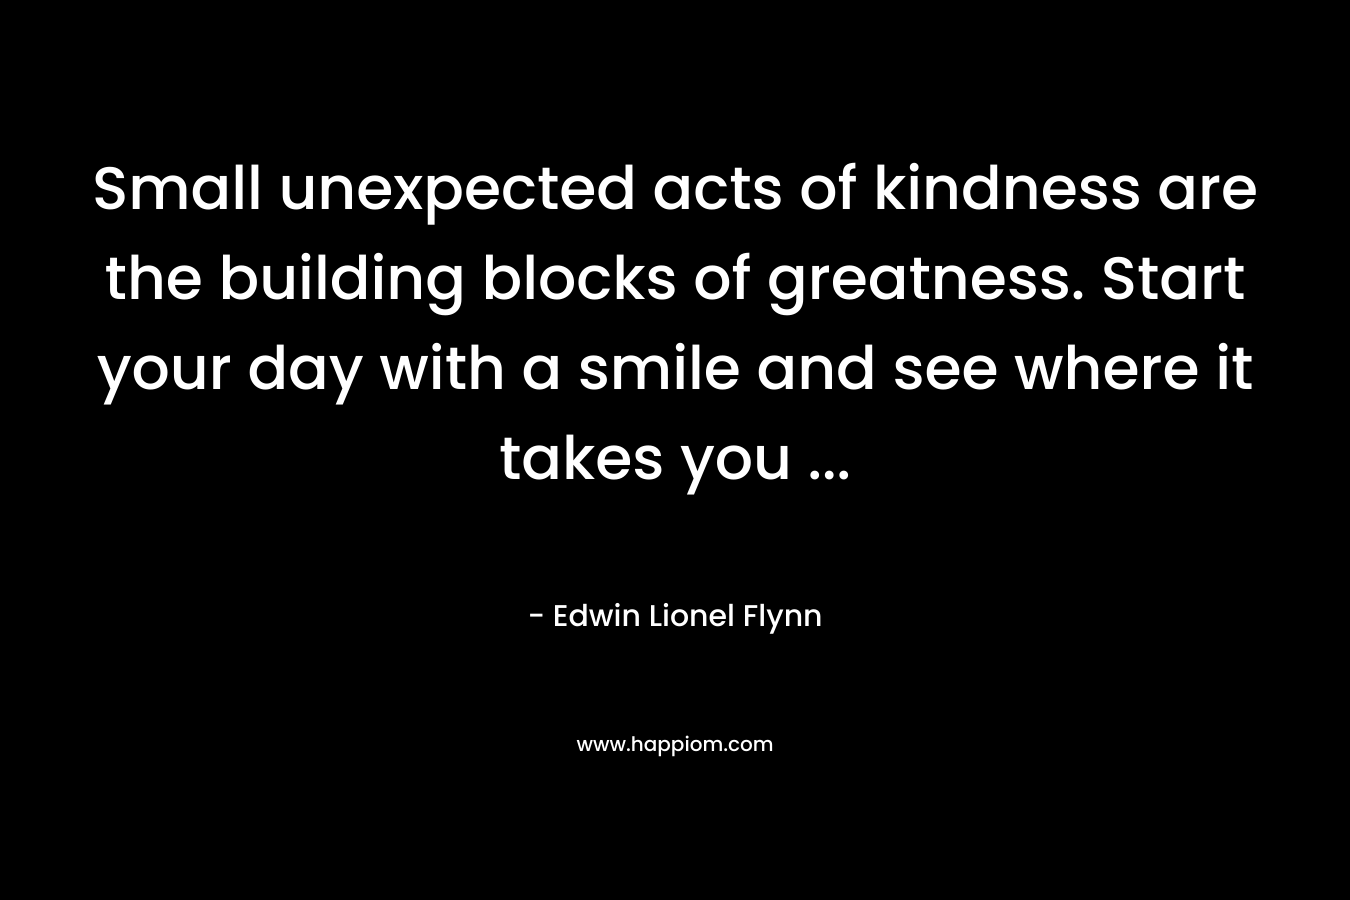 Small unexpected acts of kindness are the building blocks of greatness. Start your day with a smile and see where it takes you … – Edwin Lionel Flynn